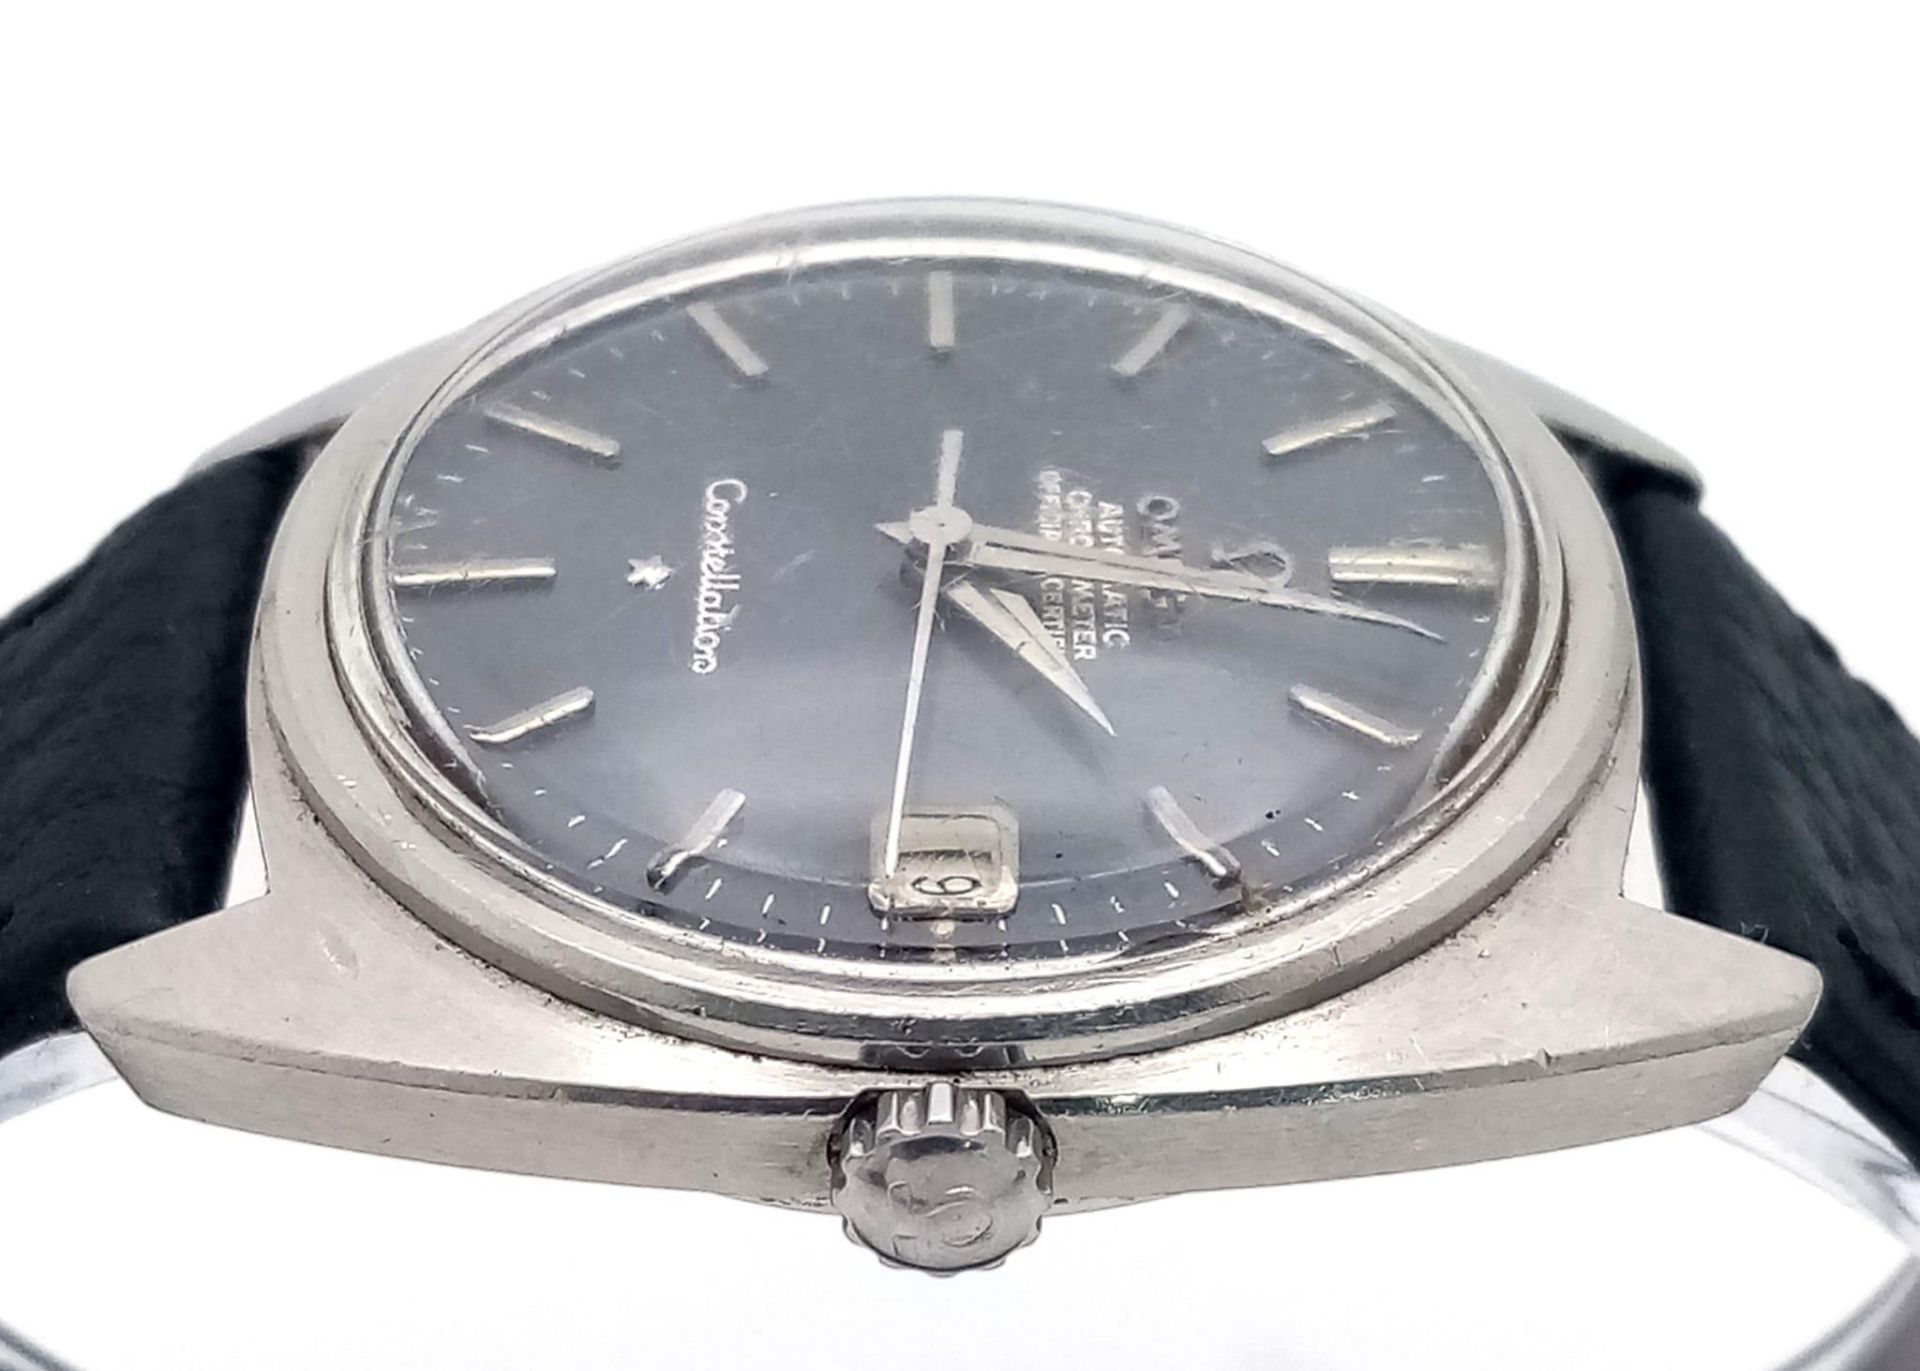 A Vintage Automatic Omega Constellation. Black leather strap. Stainless steel case - 36mm. Grey dial - Image 5 of 7